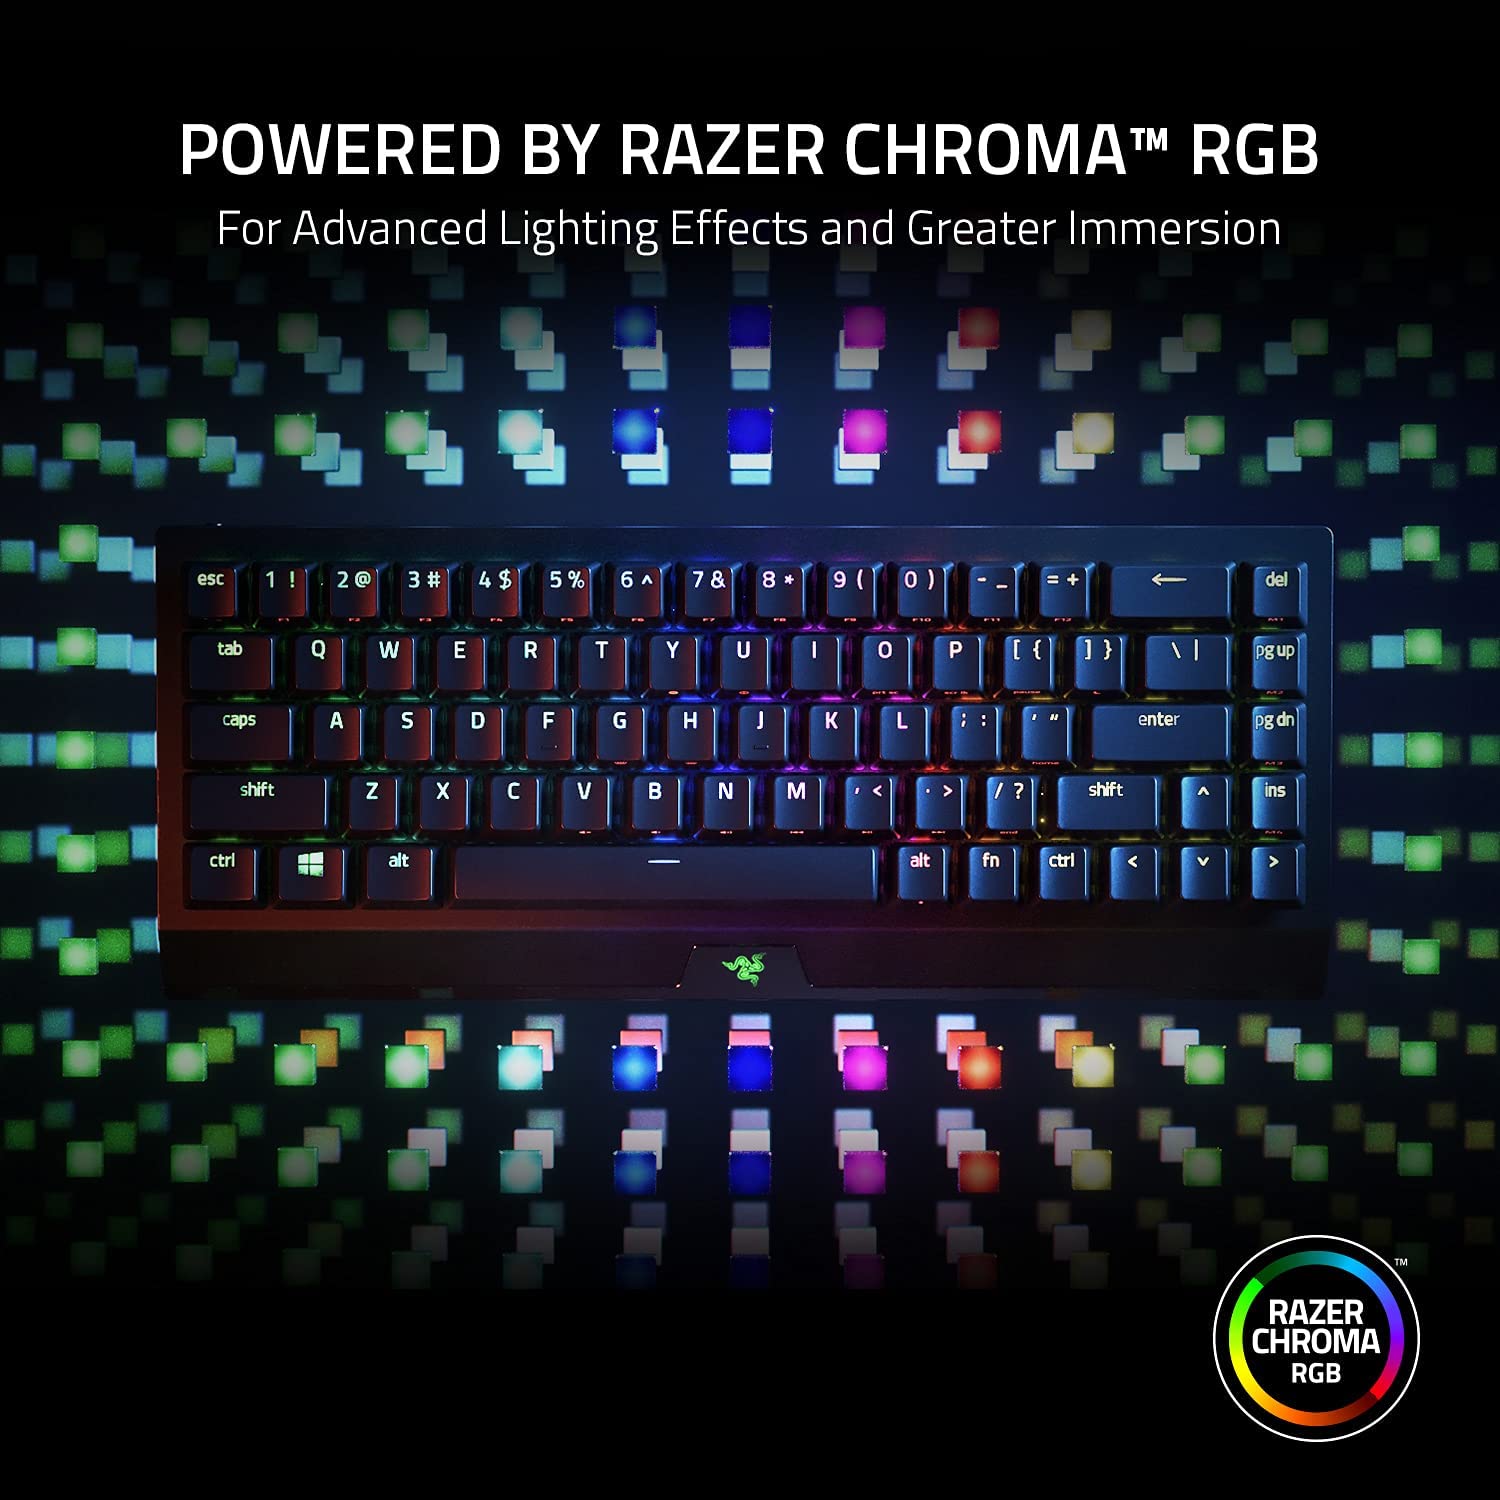 Razer BlackWidow V3 Mechanical Gaming Keyboard: Green Mechanical Switches -  Tactile & Clicky - Chroma RGB Lighting - Compact Form Factor 